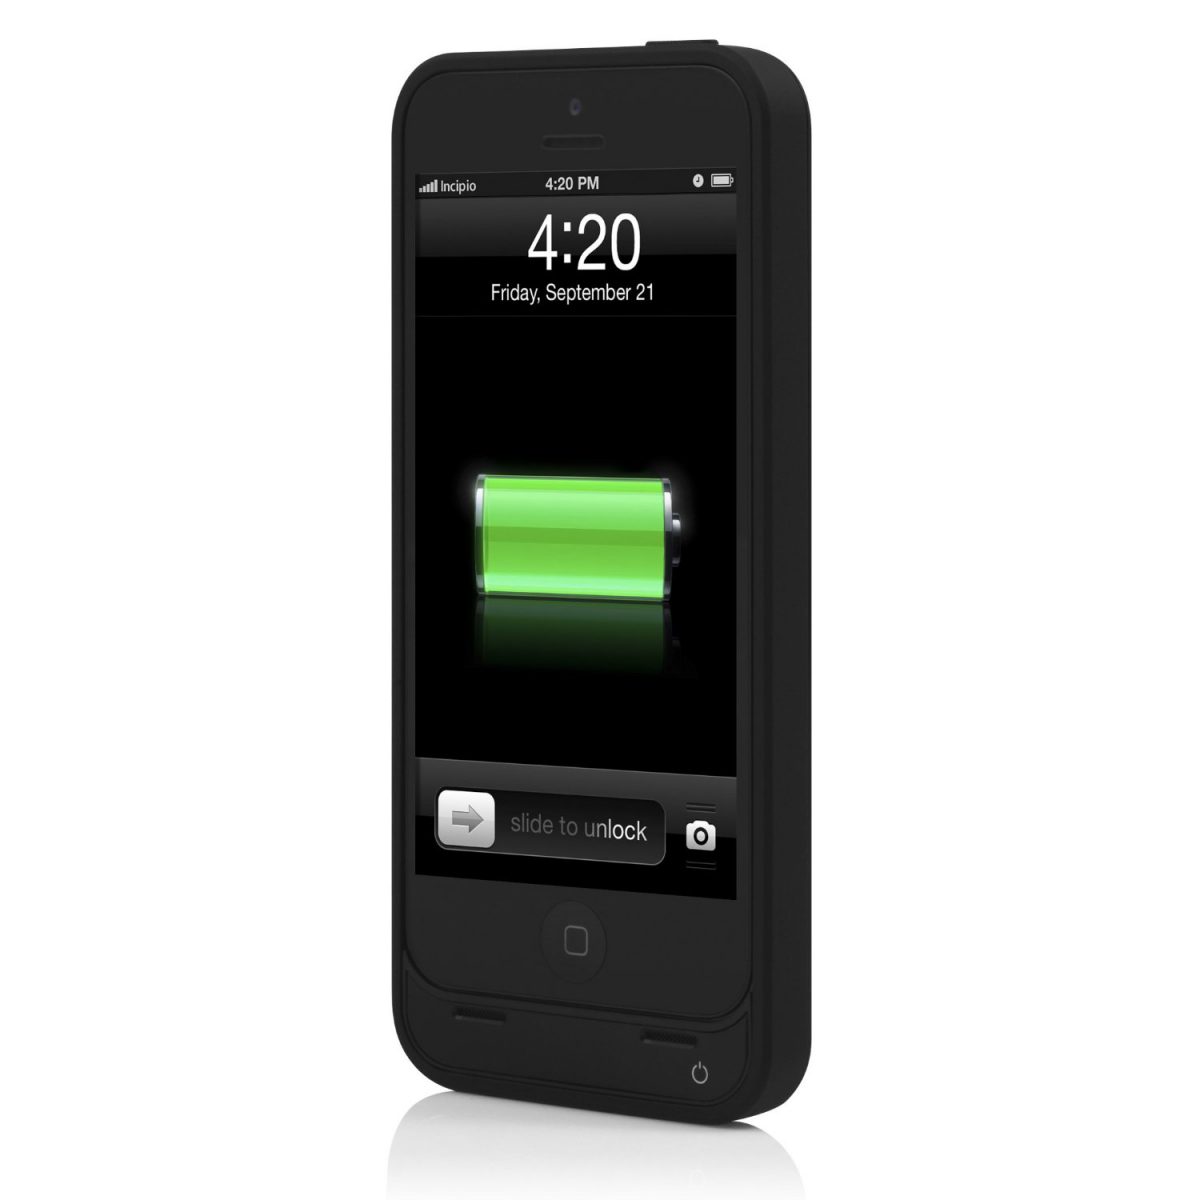 The Incipio OffGRID Thin iPhone Battery Case is the Total Package